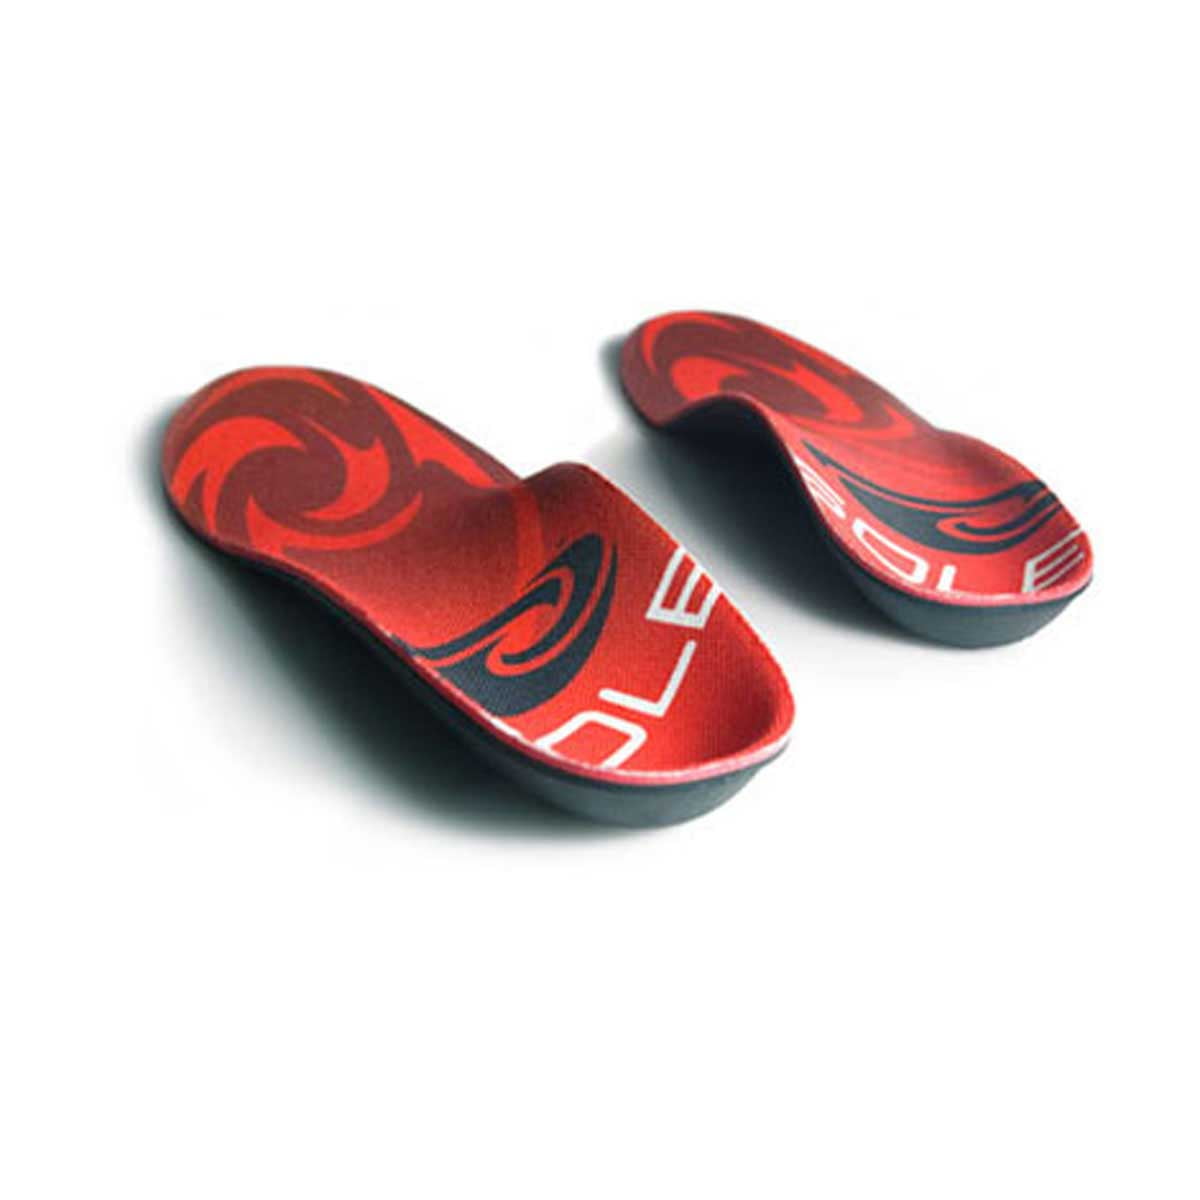 SOLE Softec Response Casual Custom Moldable Orthotics All Colors All Sizes 